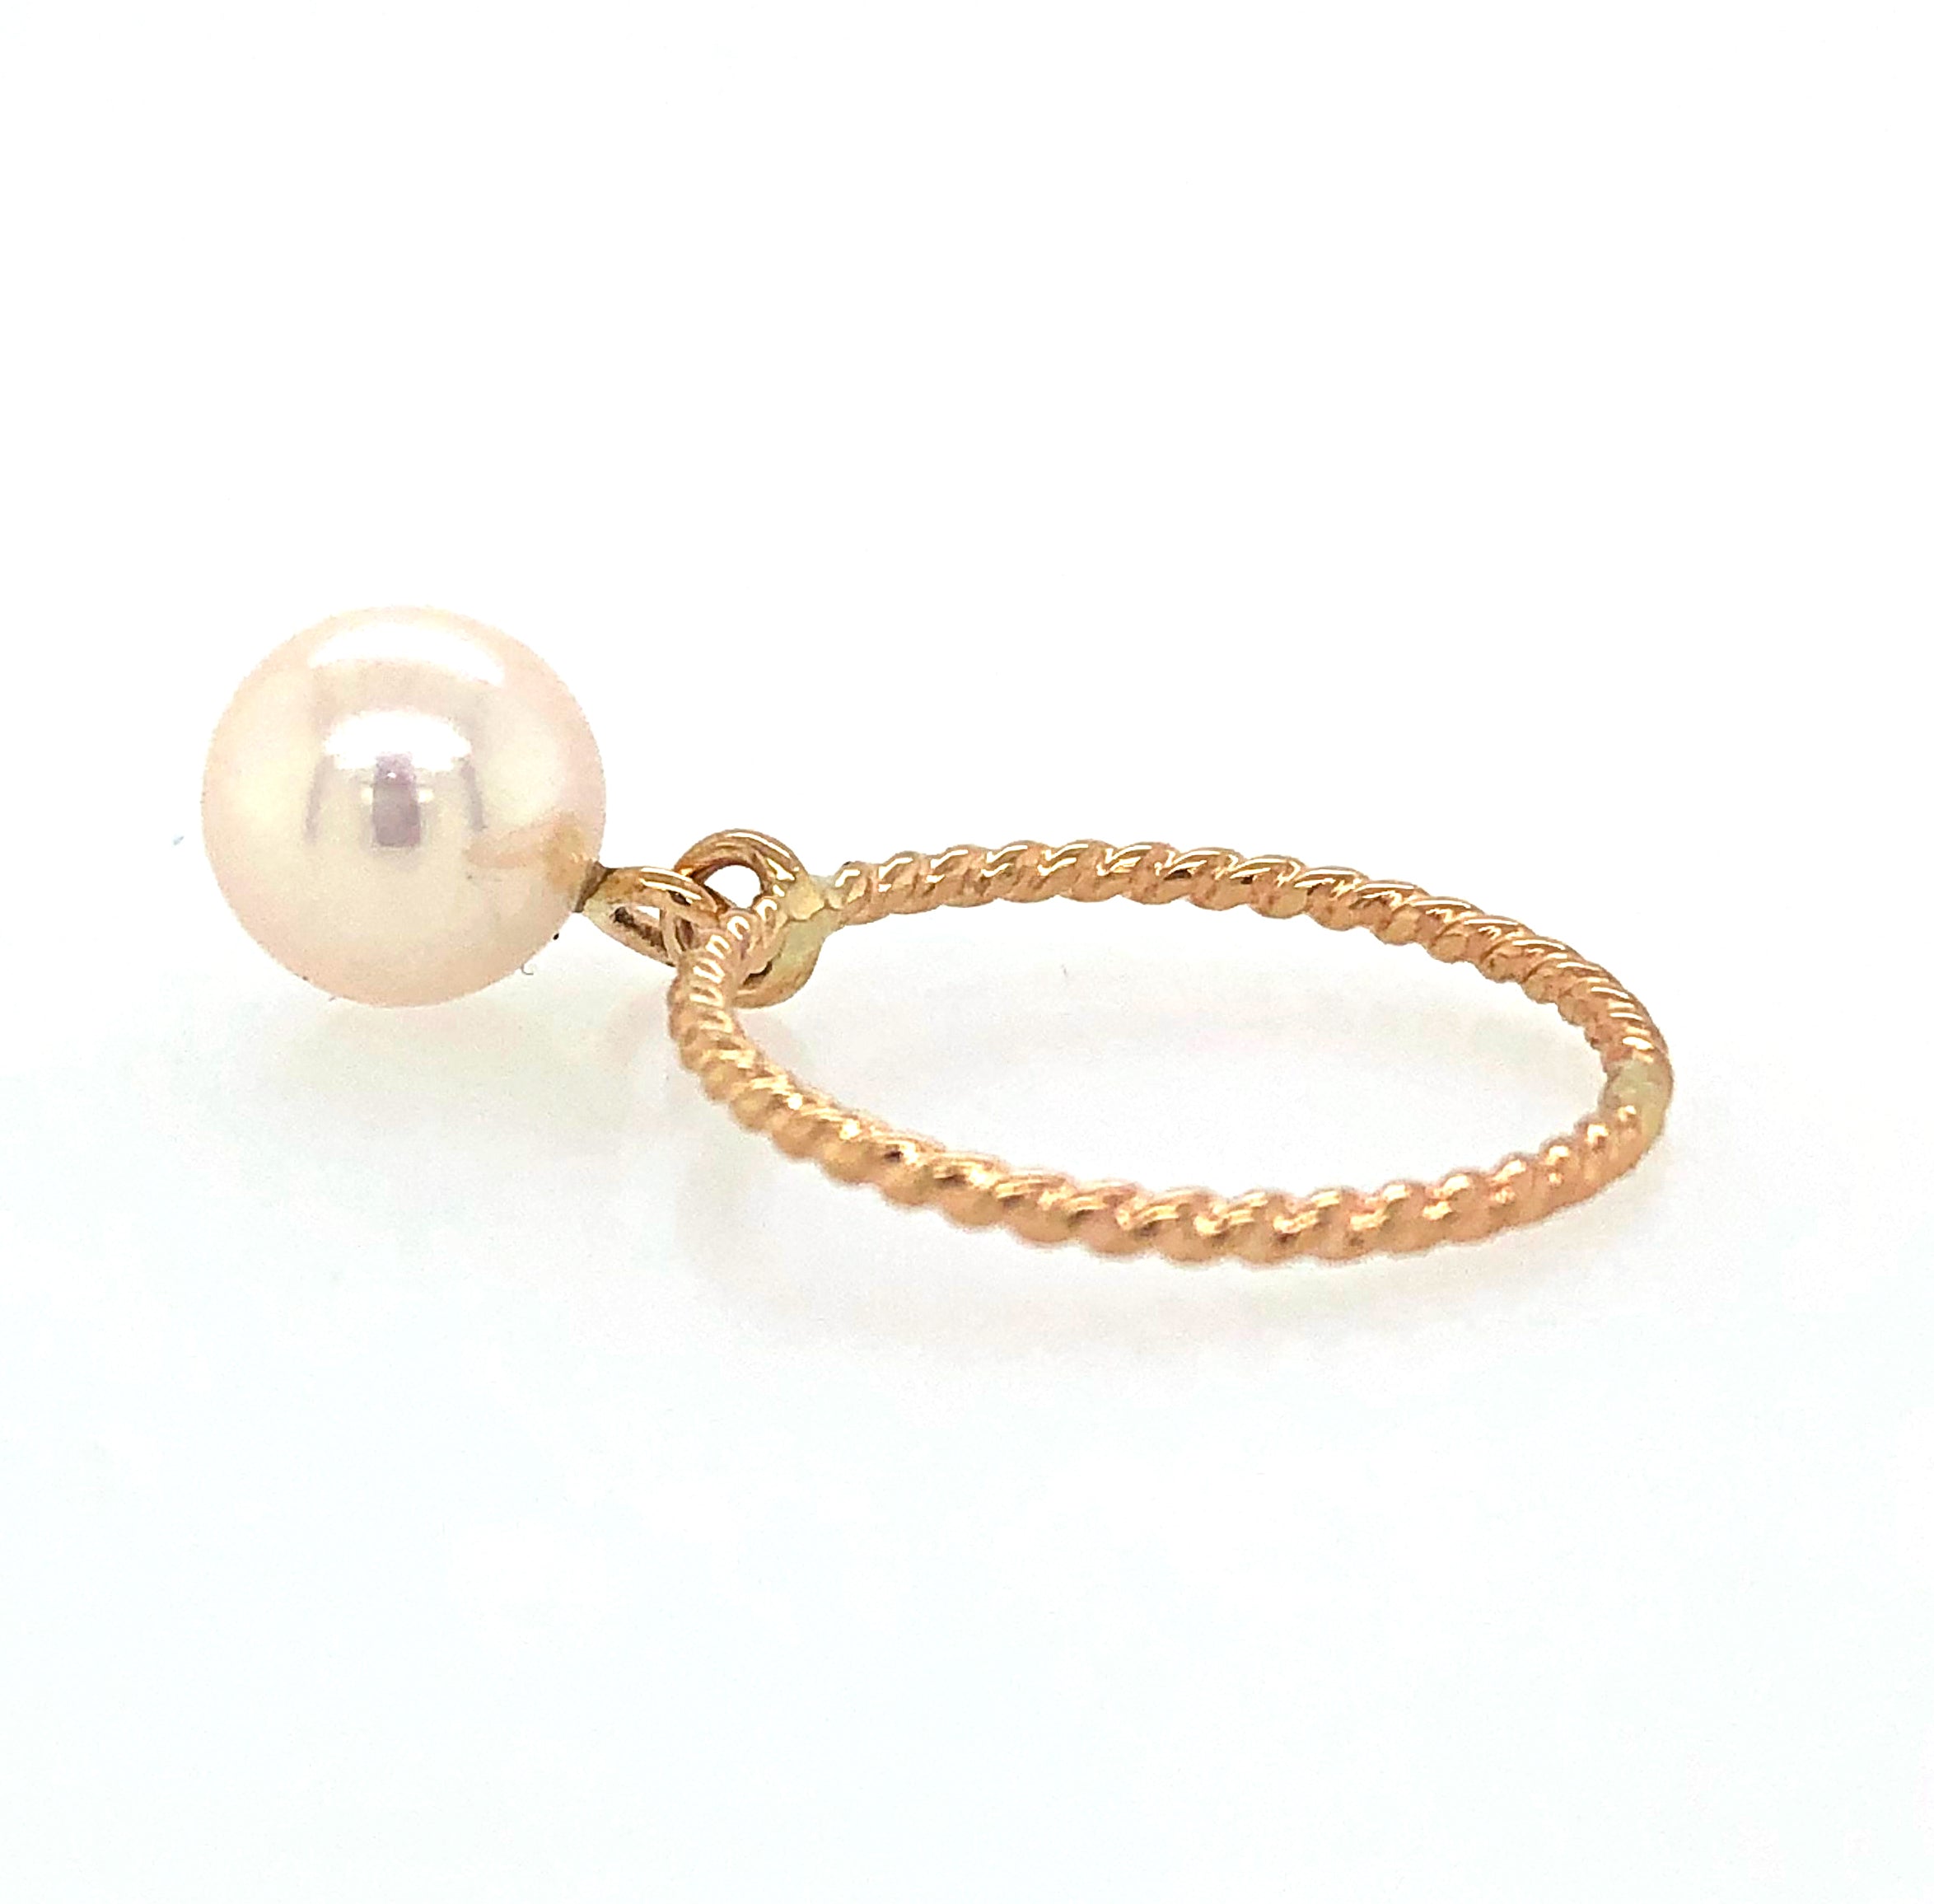 Pearl Ring in Solid 14k Gold with Twist Band, Pearl Dangle Ring, Pearl Solitaire, Solid Gold Ring